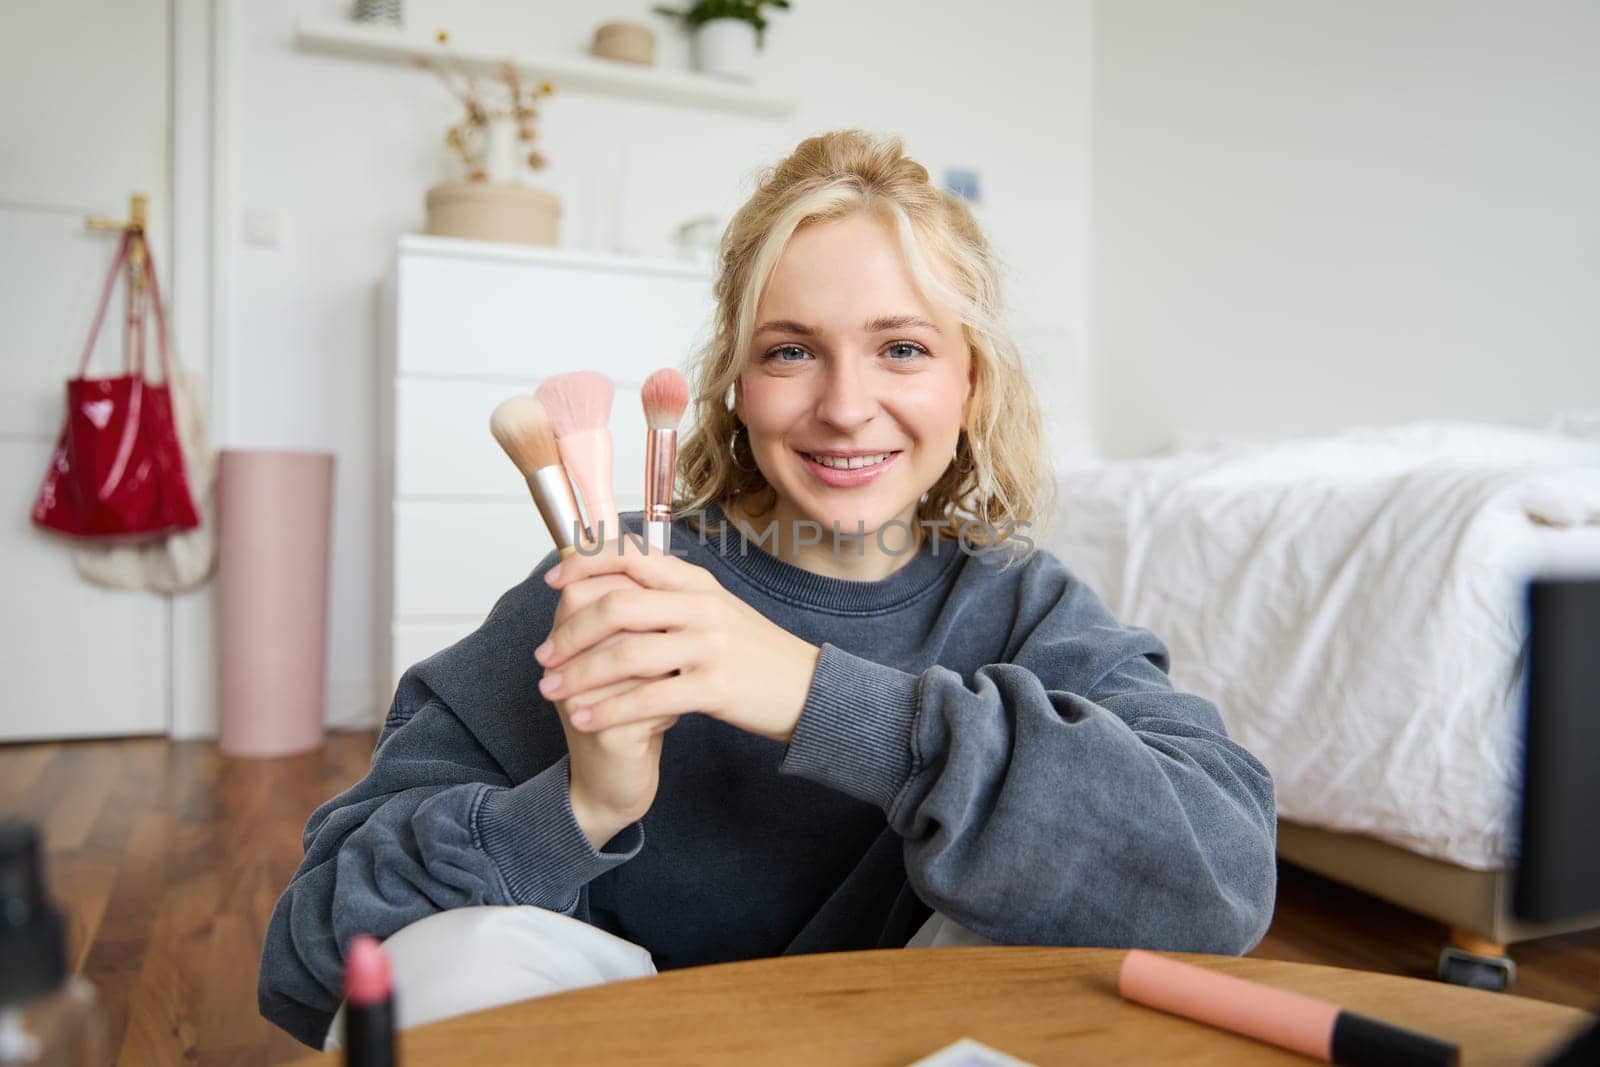 Portrait of young woman, content creator, making a video about makeup, showing brushes to audience, looking at camera, recording beauty tutorial, smiling happily.